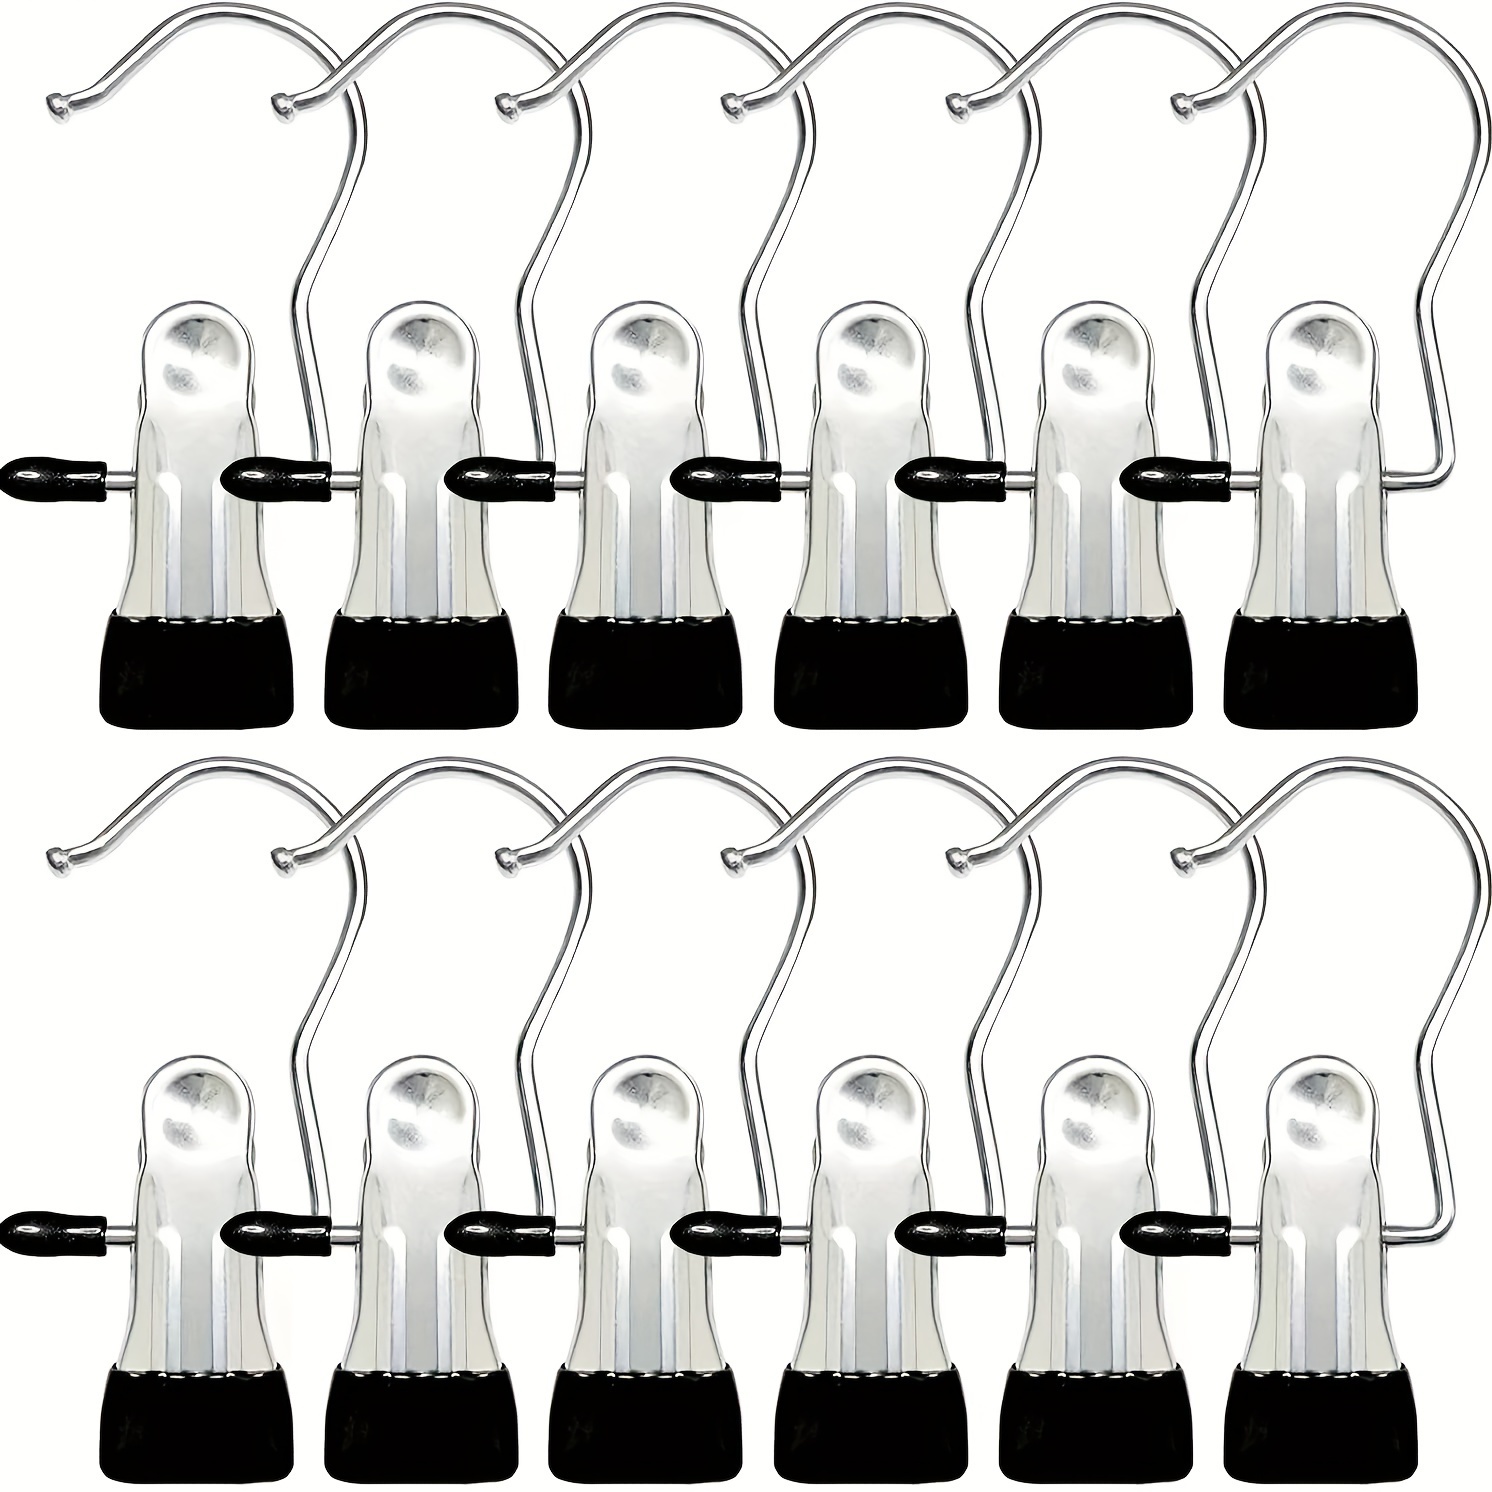 1-12PCS Sock Clips For Laundry Portable Strong Clothes Pins